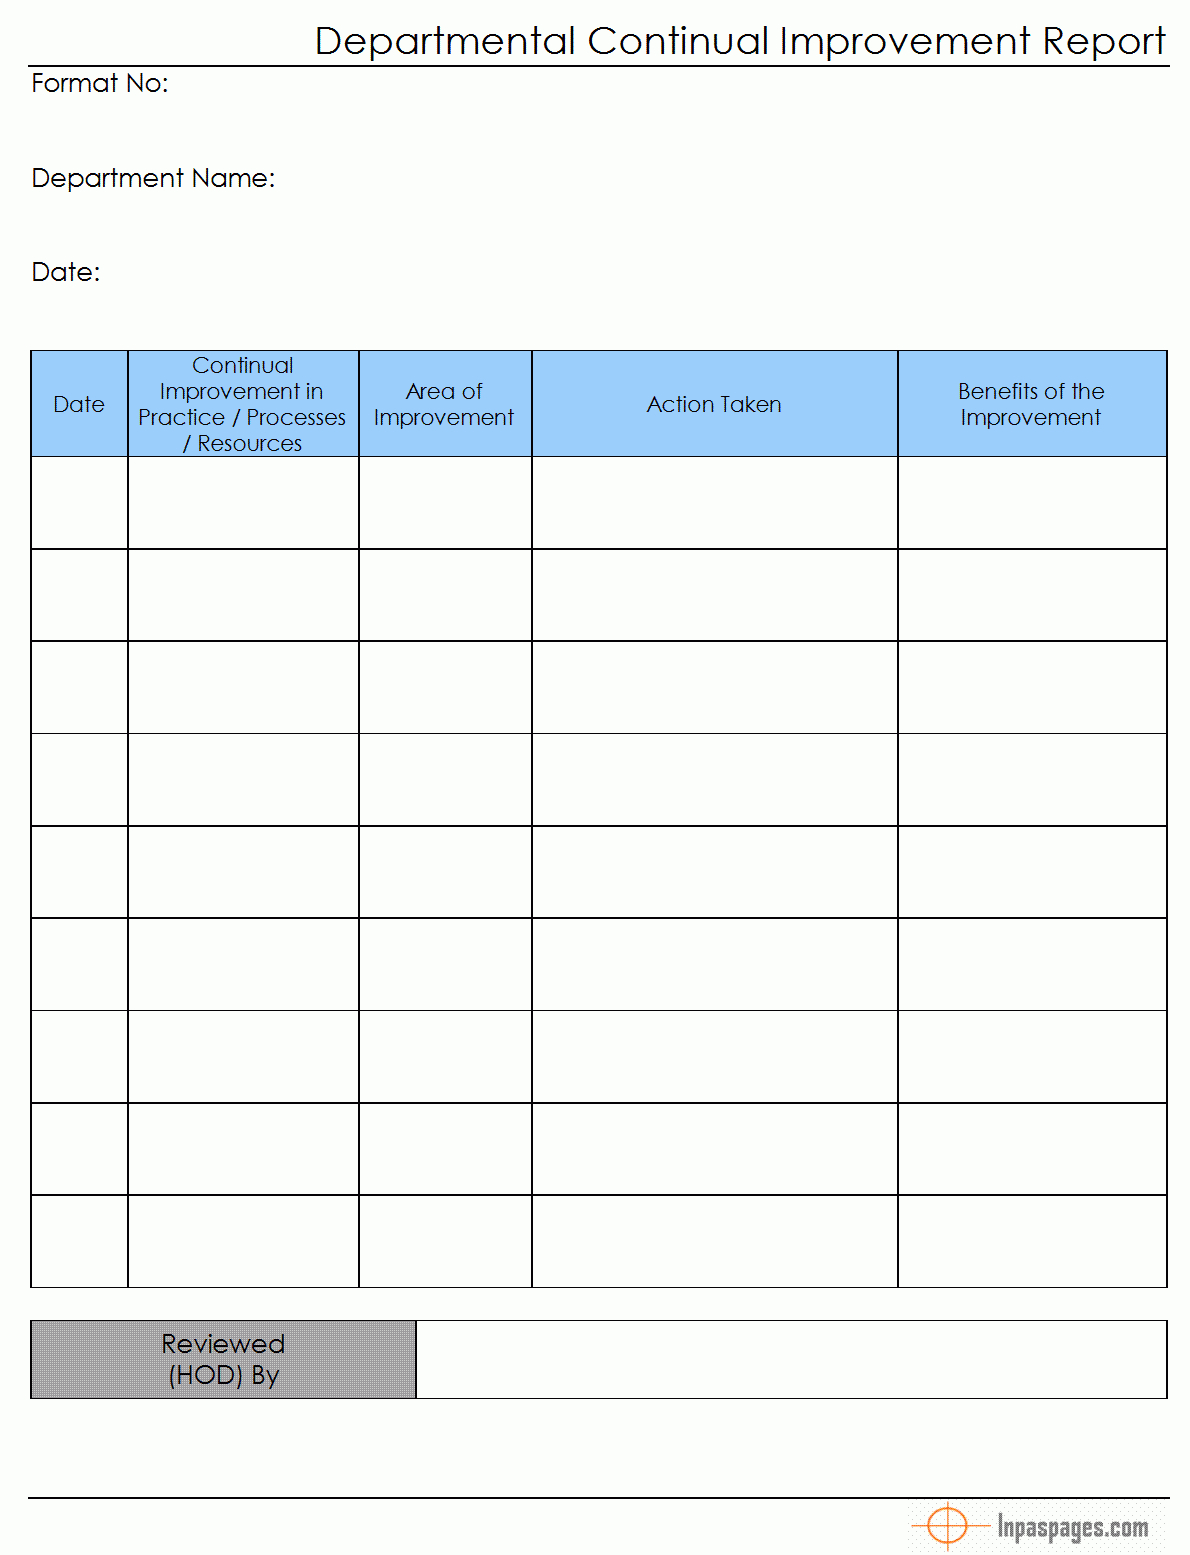 Continual Improvement Report (Departmental) - With Regard To Improvement Report Template